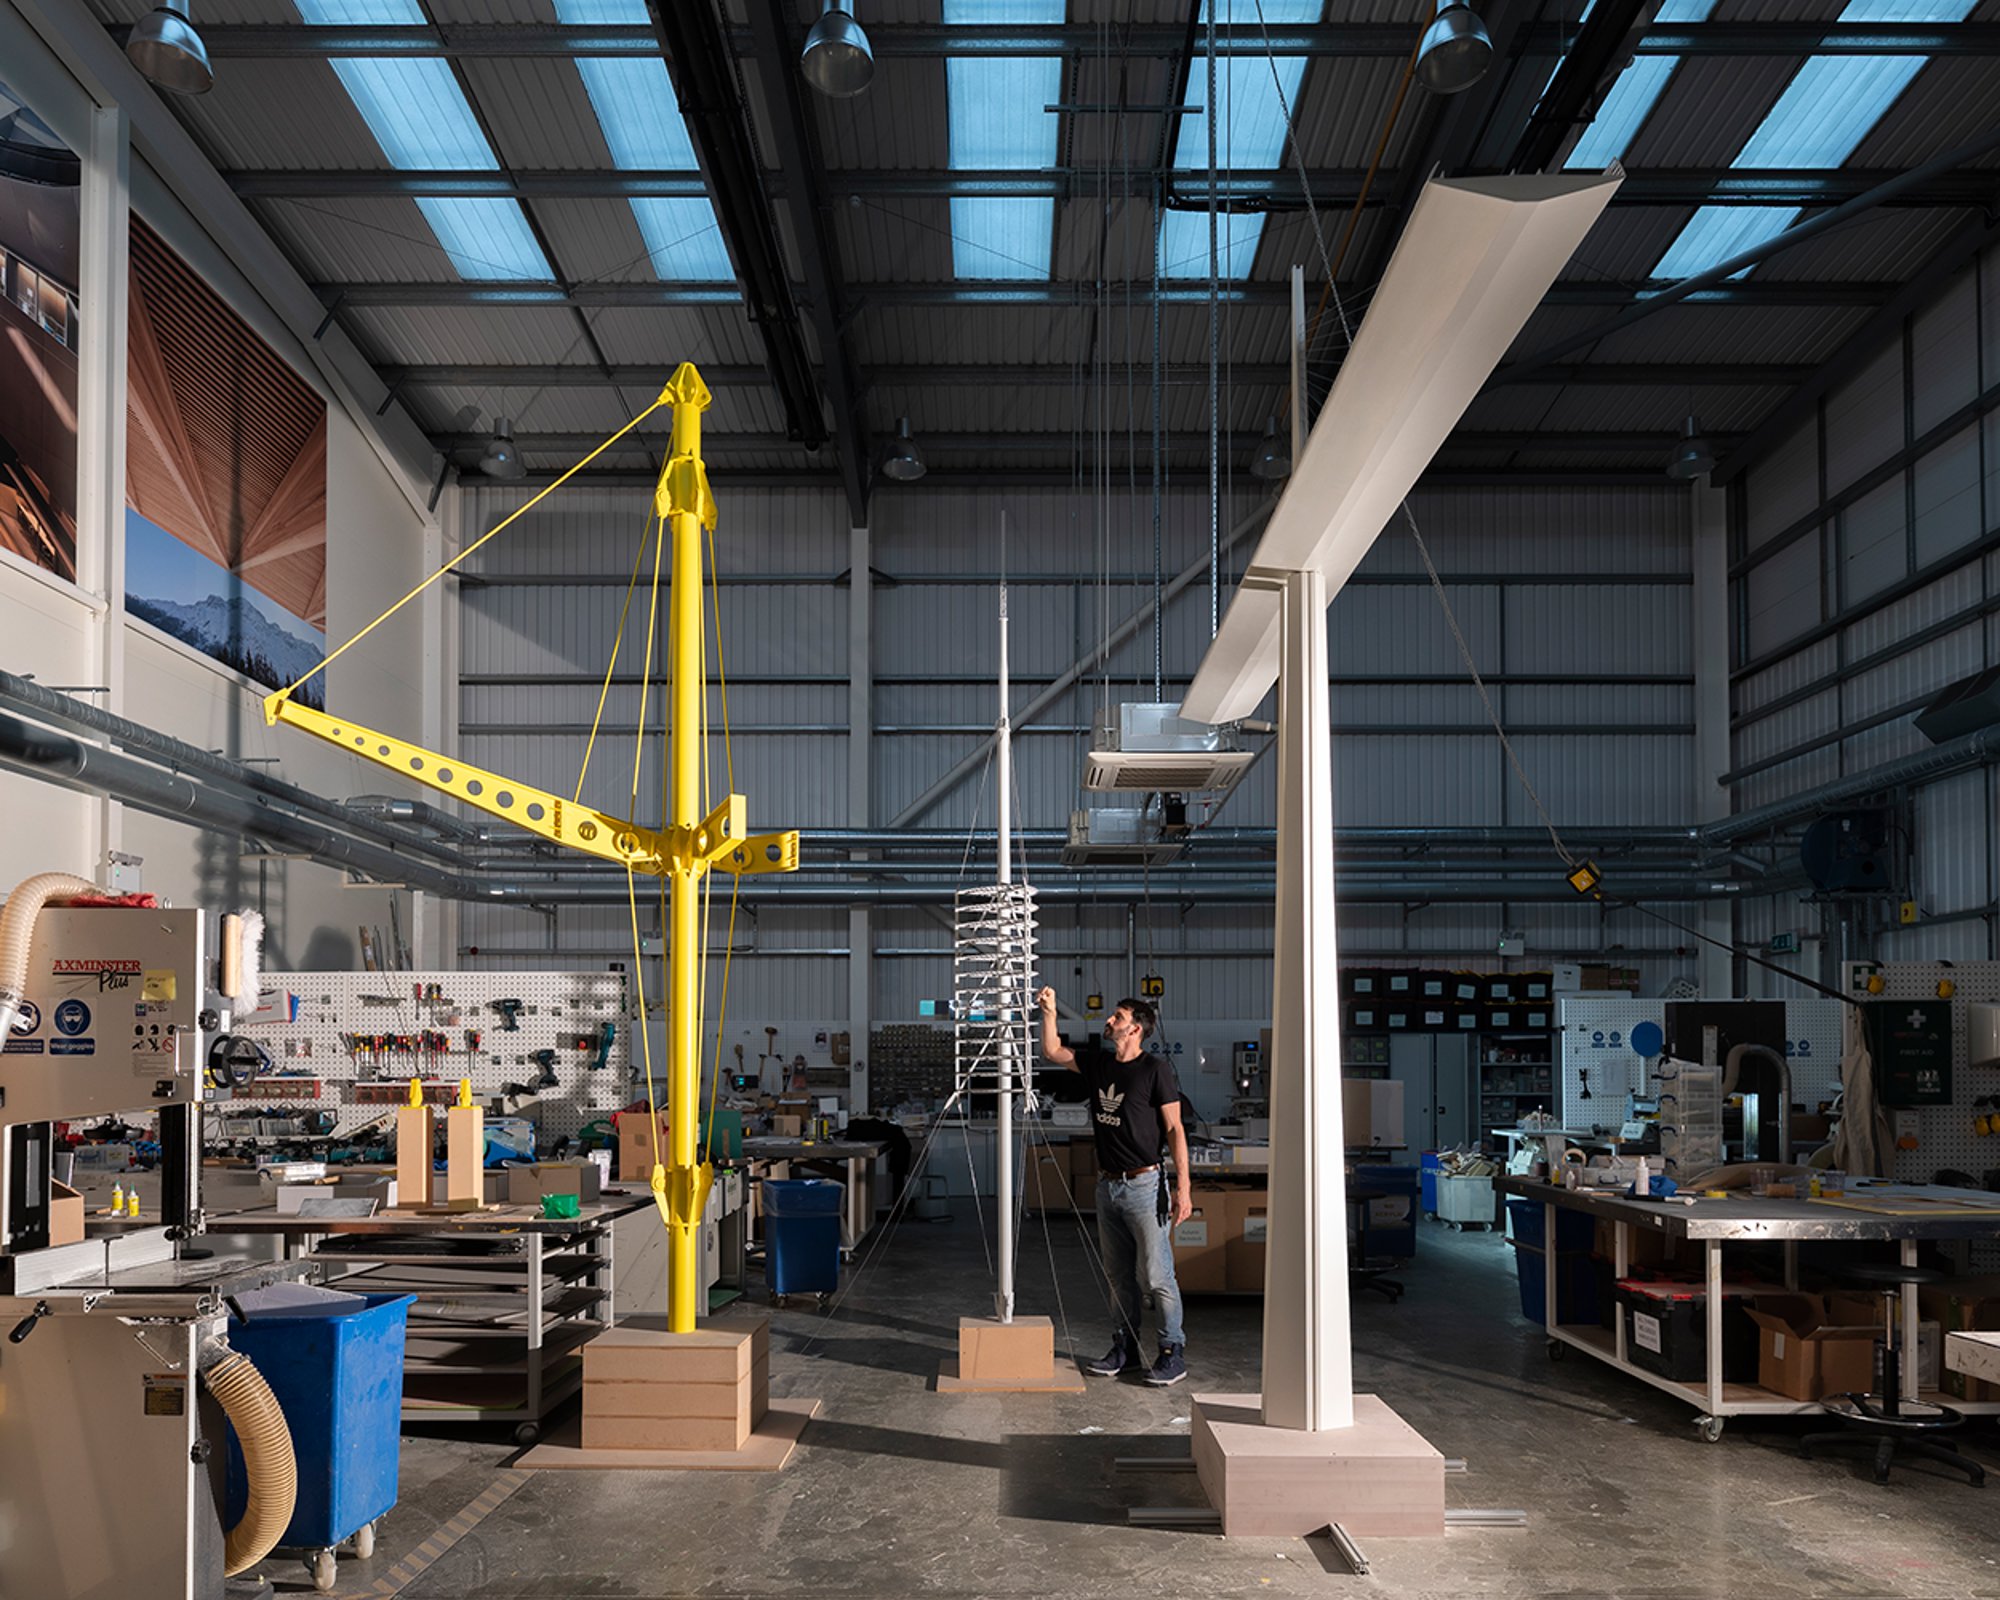 Building structural models in the practice's London workshop, before they were transported to the Centre Pompidou. These scaled models of the Renault Distribution Centre's yellow skeleton, Torre de Collserola and the Millau Viaduct (left to right), were made especially for the exhibition.